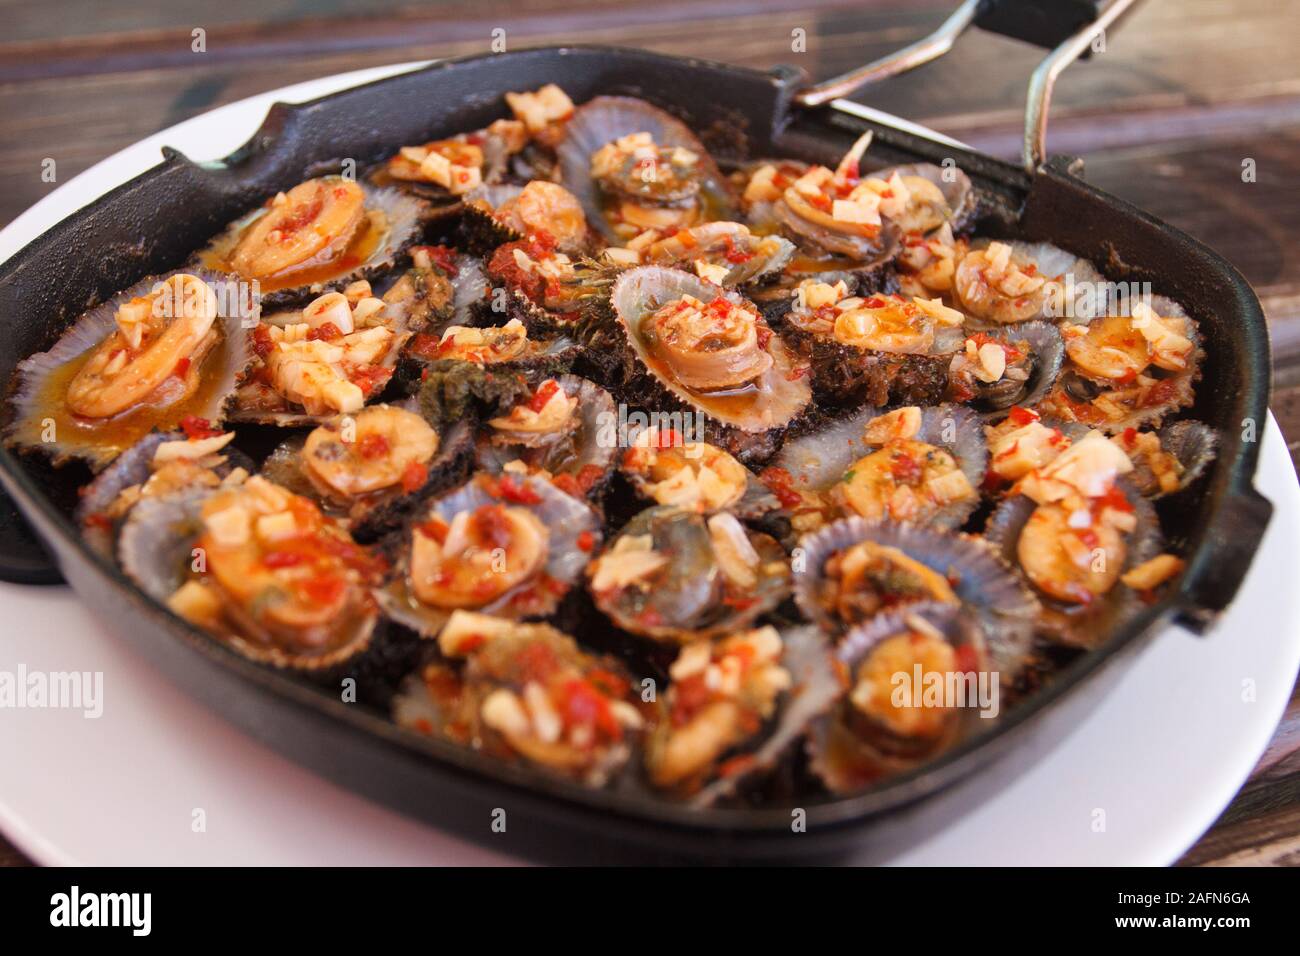 Grilled limpets or Lapas served in cast iron pan, A delicacy of Azores islands. Stock Photo